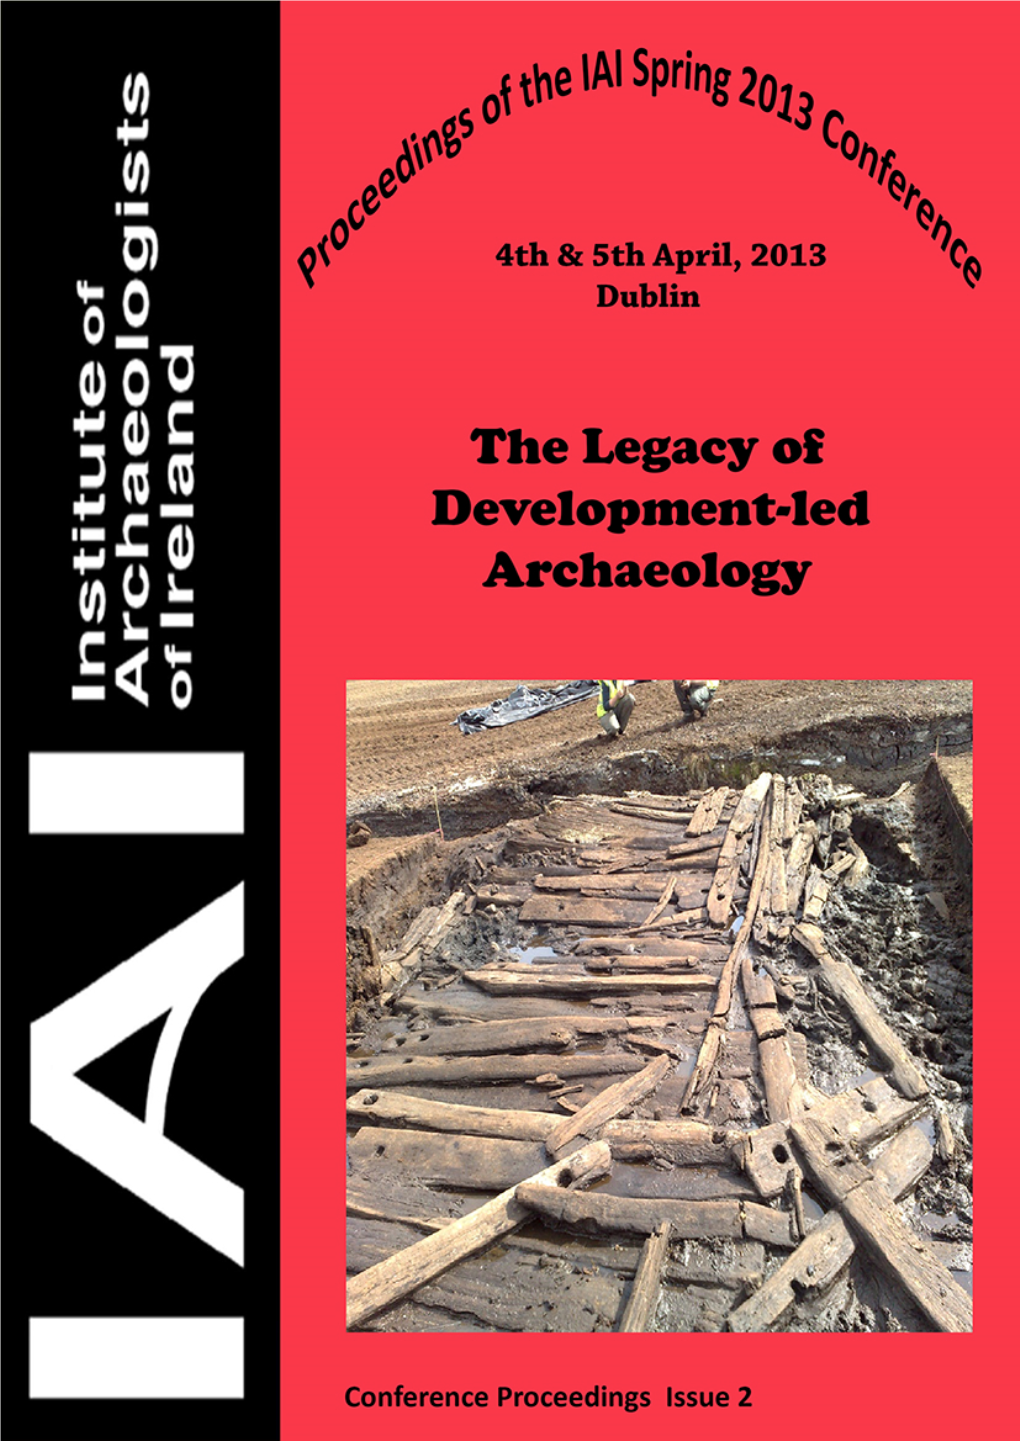 Proceedings of the IAI Spring 2013 Conference